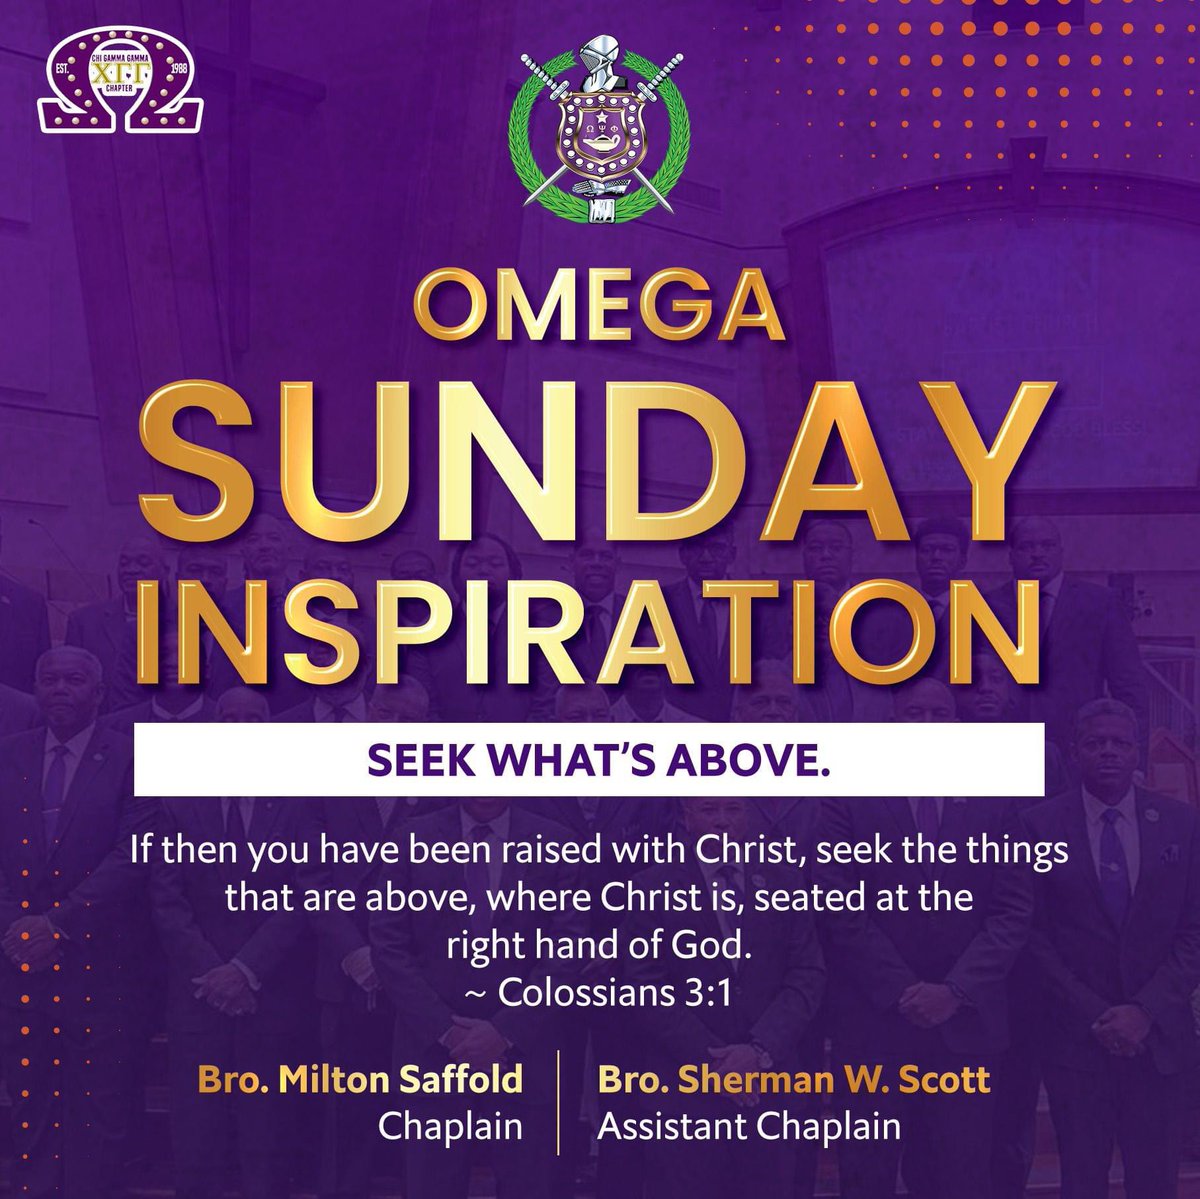 Sunday Inspiration from the Chaplain Brother Milton E. Saffold II and Assistant Chaplain Bro. Sherman W. Scott of Chi Gamma Gamma -- Seek What's Above! #1911 #chigammagamma #hbcuculture #fraternity #xgg #eliteoftheelite #quepsiphi #fietts #divine9 #uplift #FIETTS